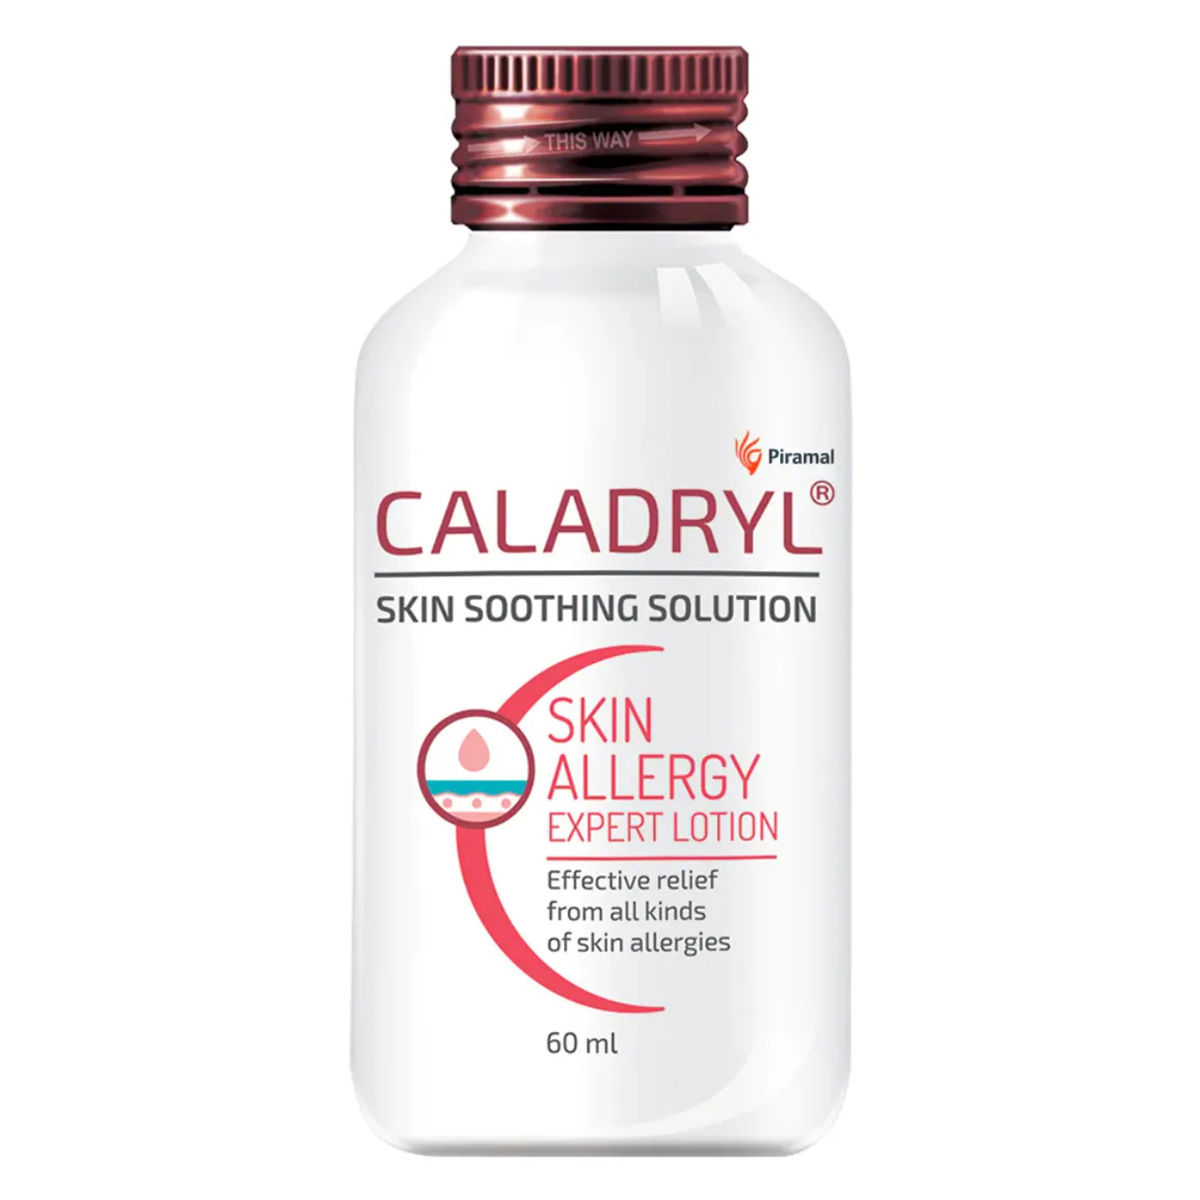 Buy Caladryl Skin Allergy Expert Lotion 60 ml | Relieves All Kind Of Skin Allergies, Rashes, Insect Bites, Sunburns, Prickly Heat, Minor Skin Irritation Online